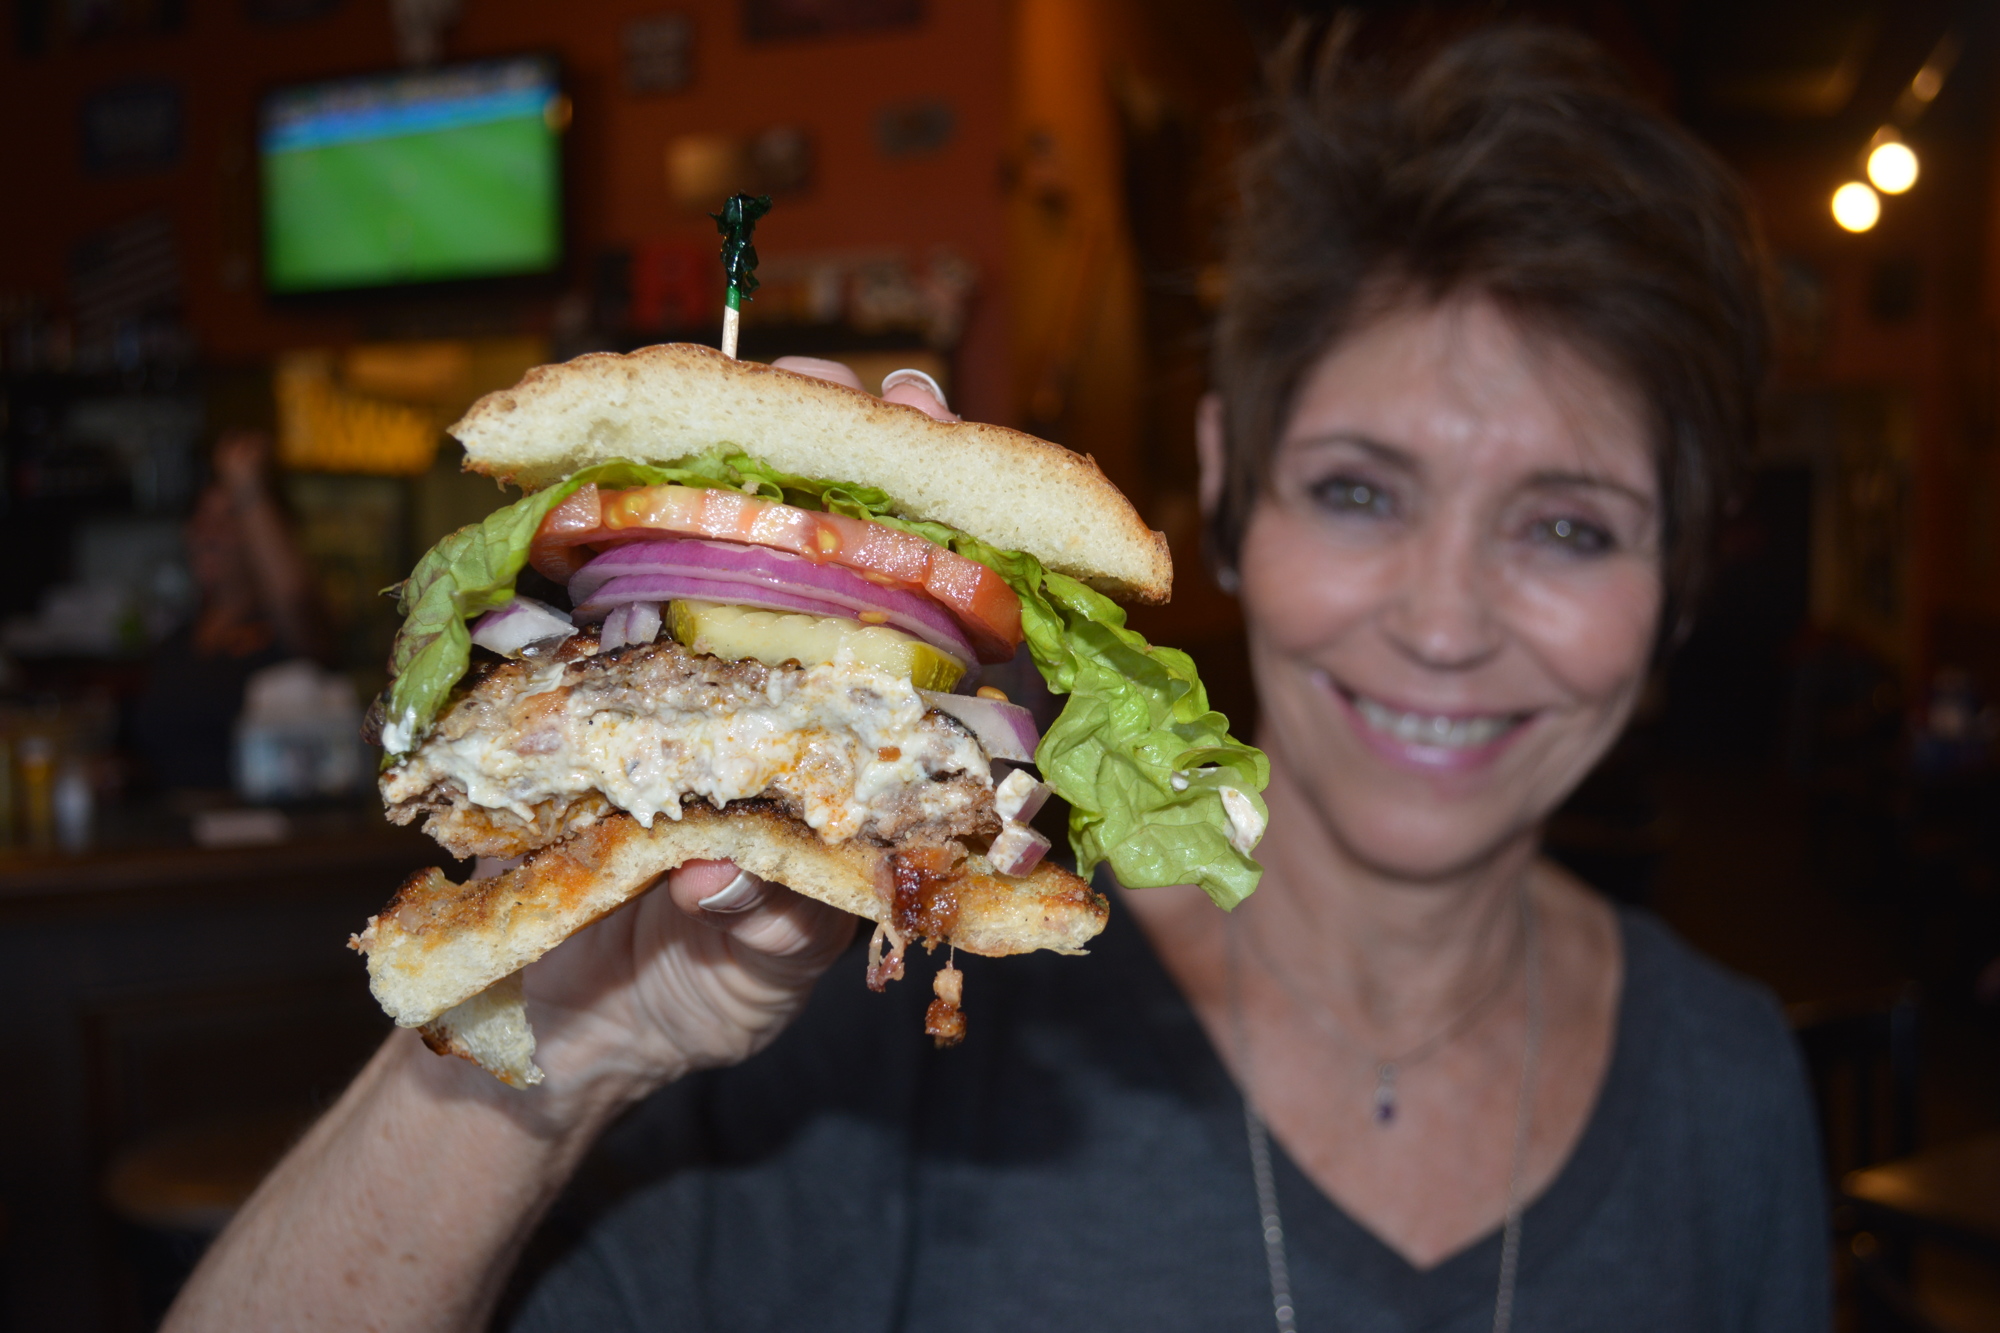 Pinki Goolsby shows off a Cheddar Bacon burger from Full Belly Stuffed Burgers.